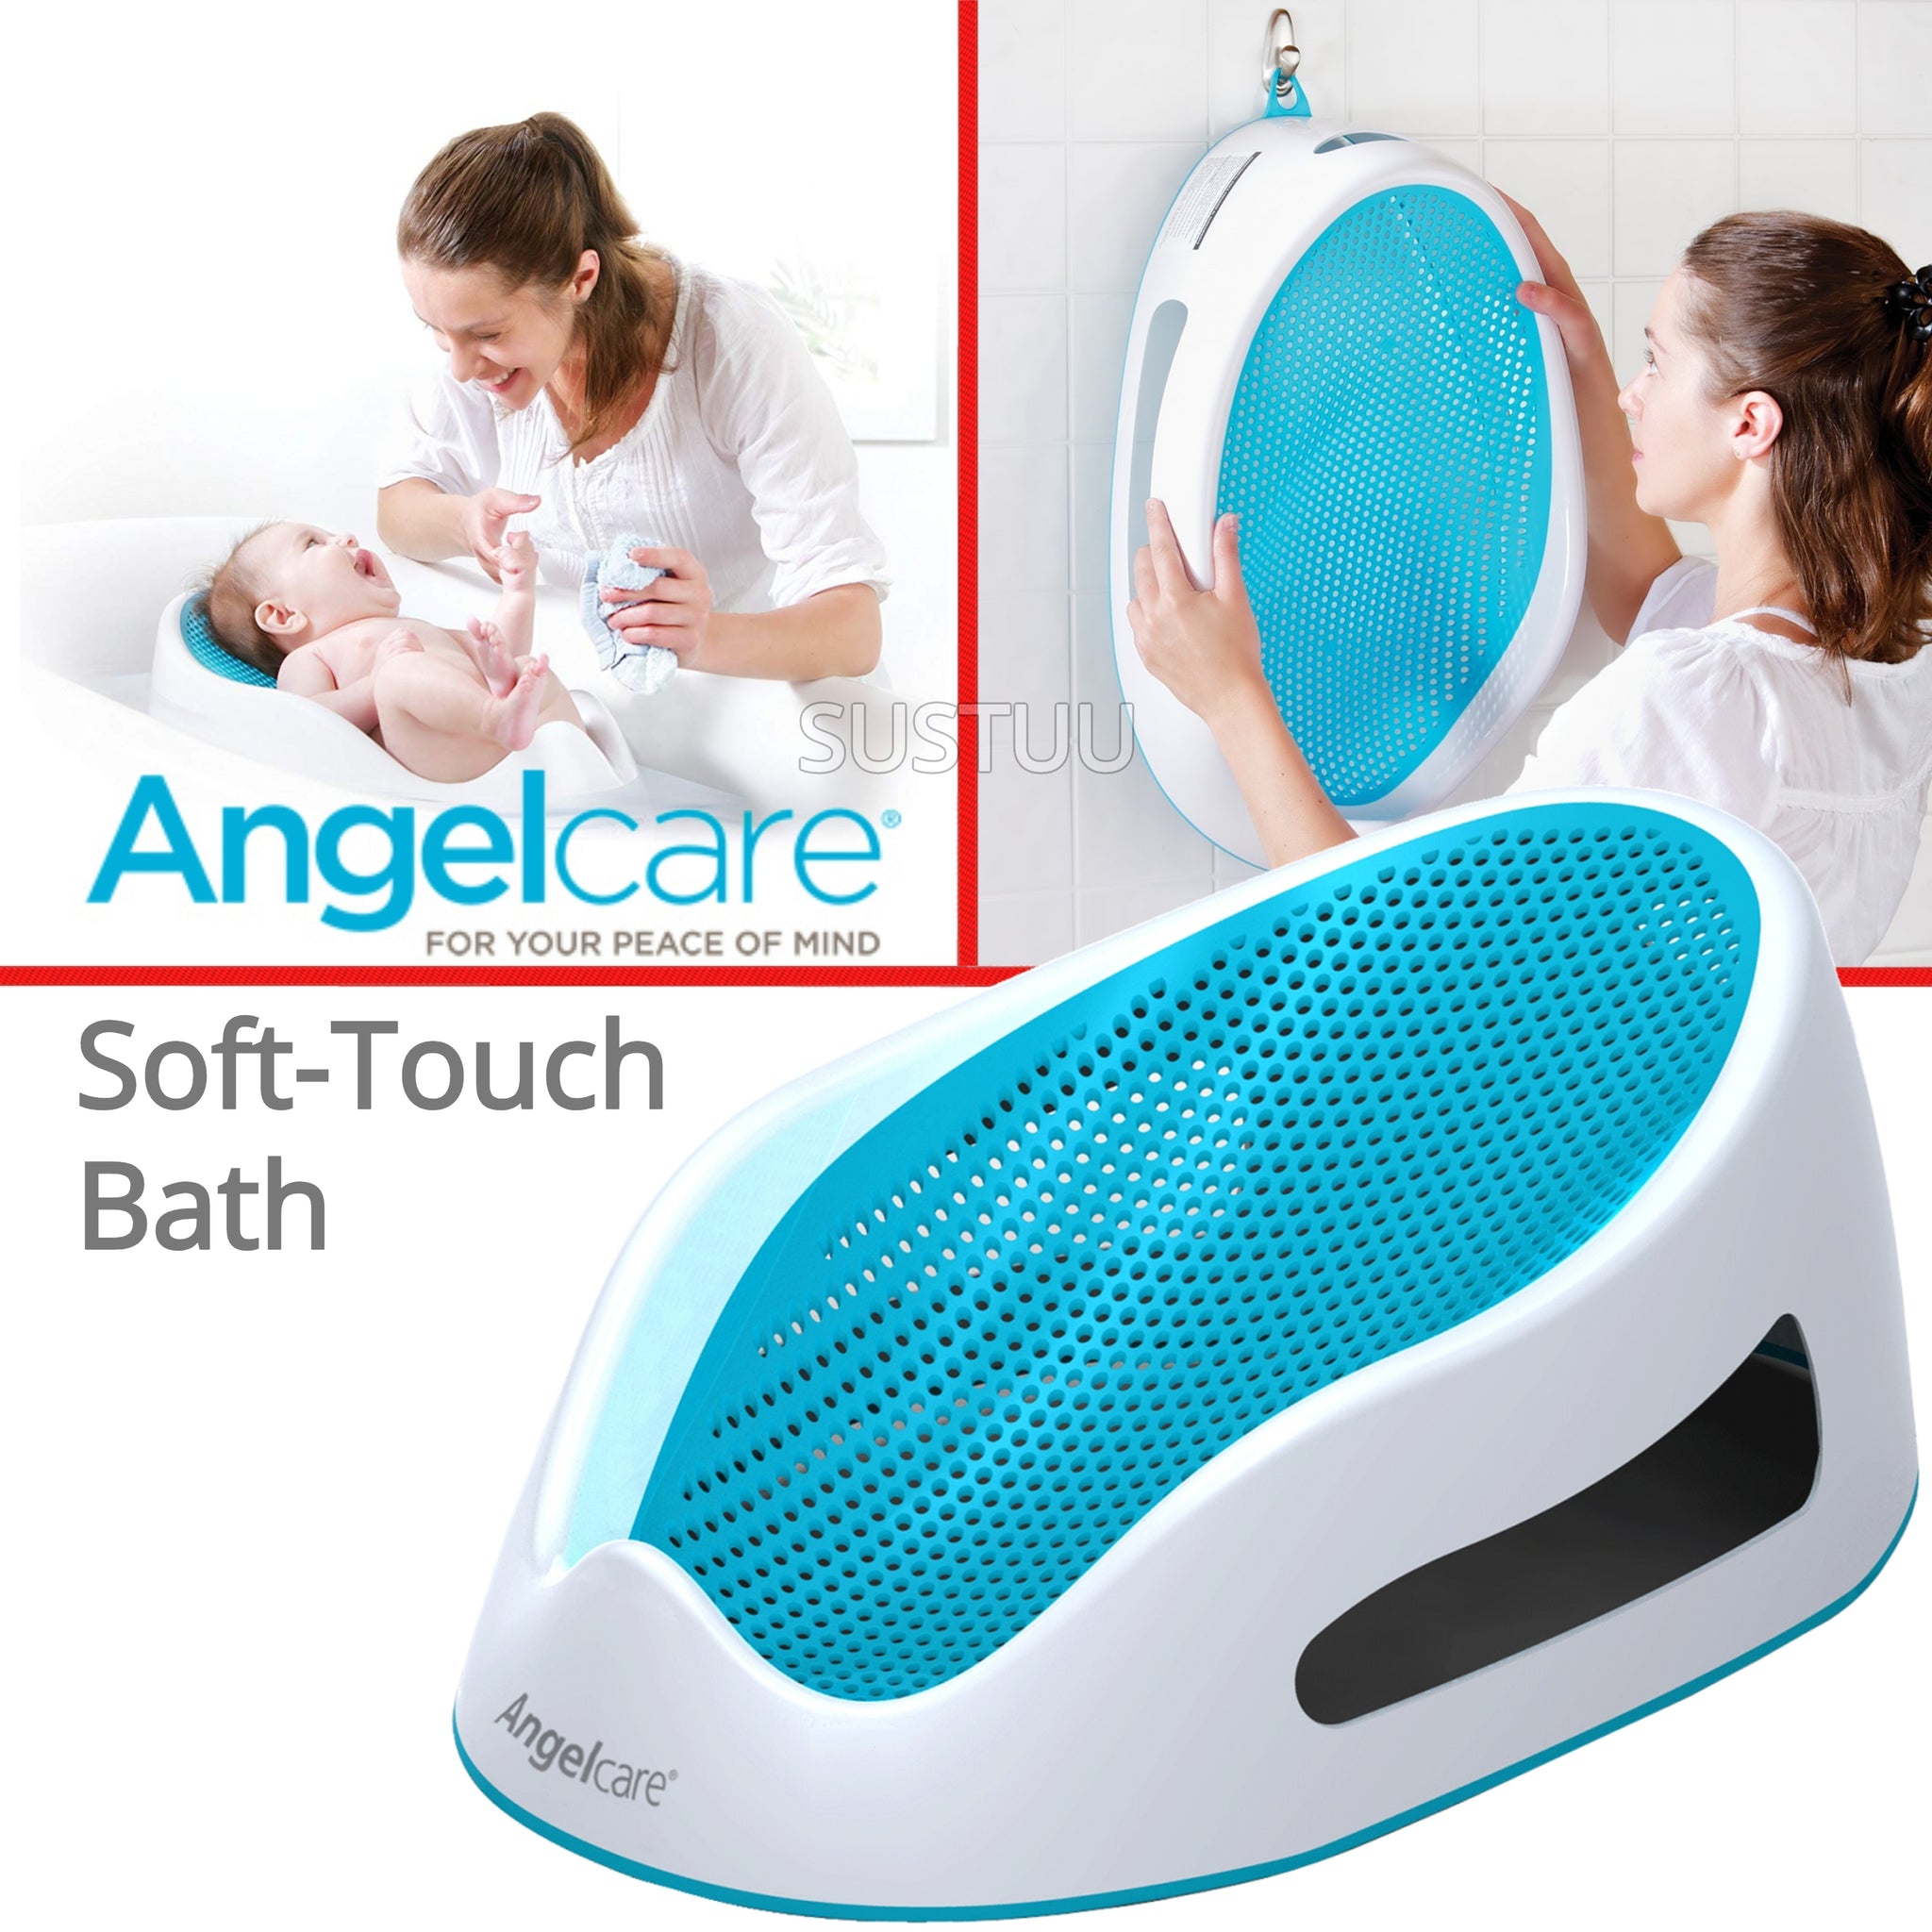 angelcare bath support